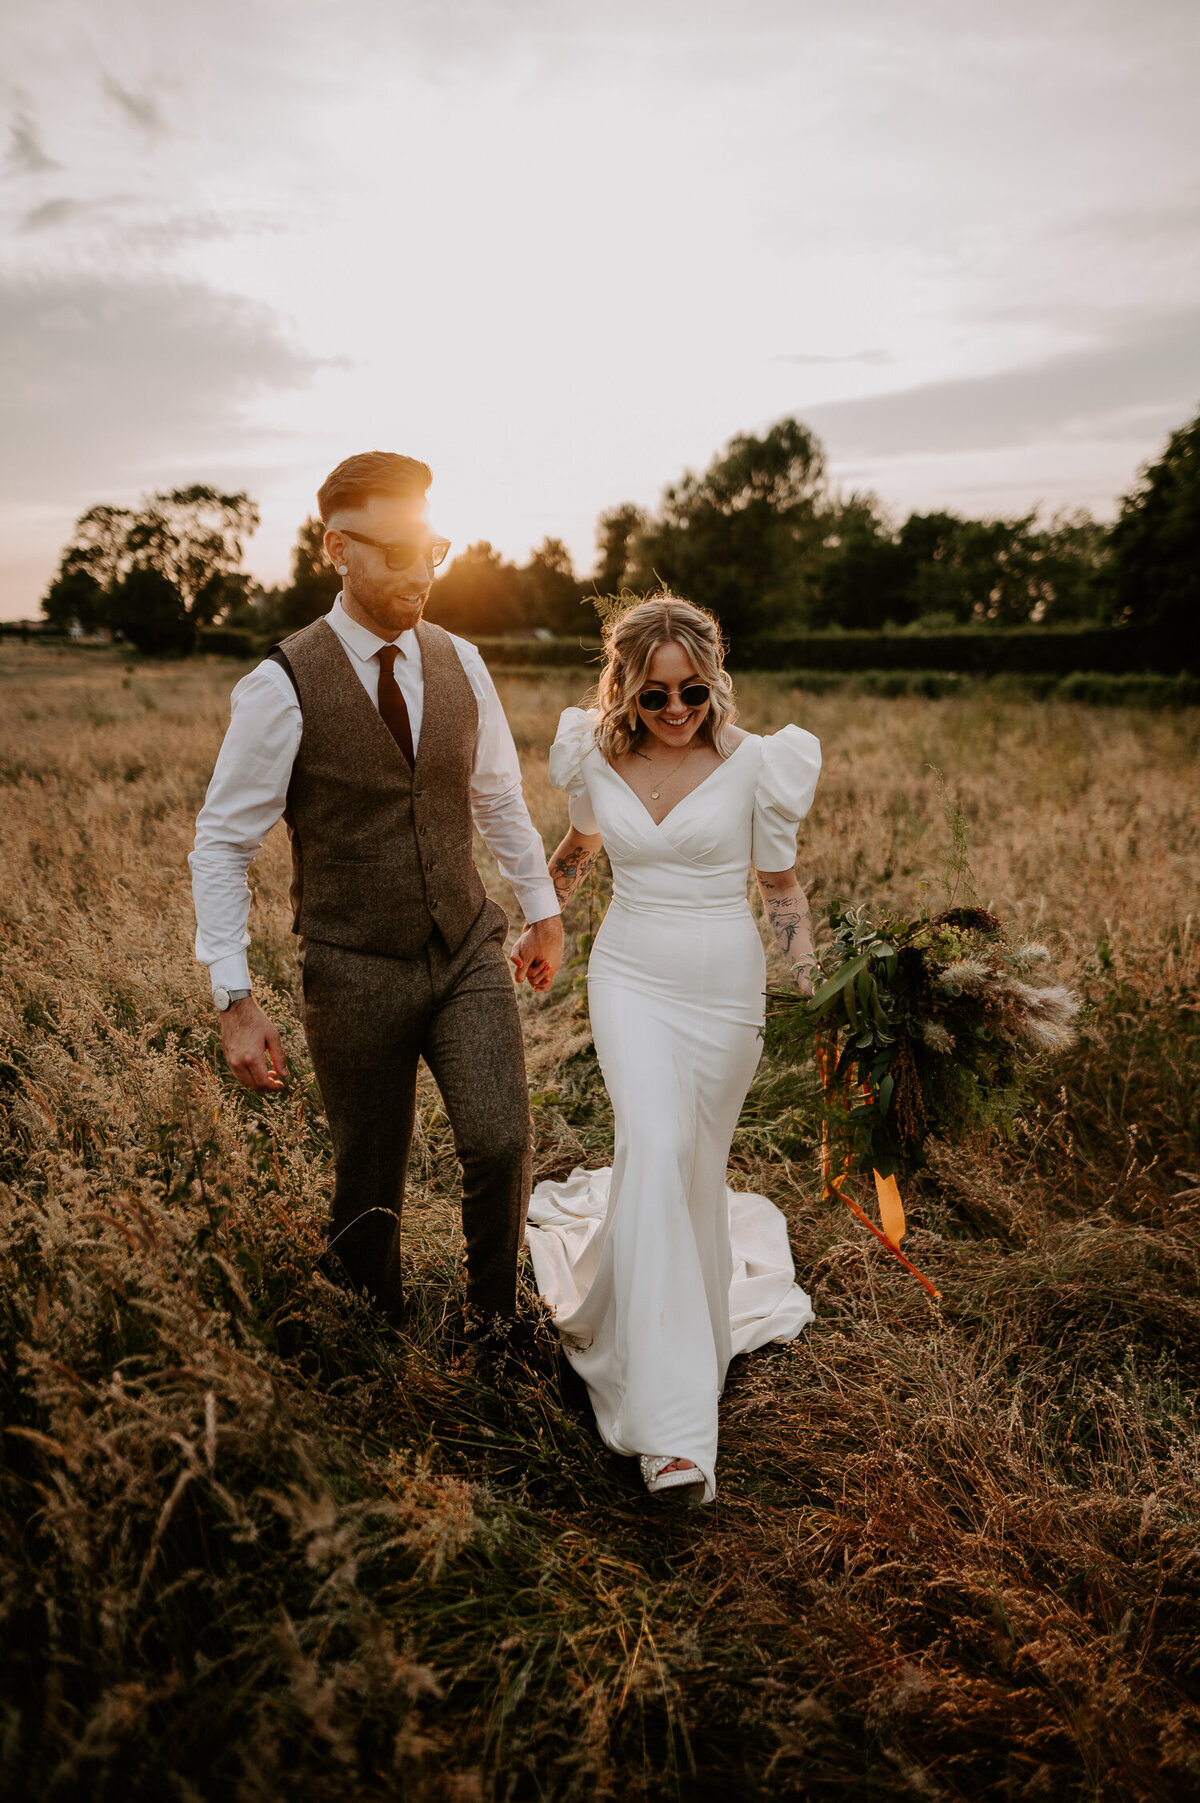 A Bride and Groom walk through the tall grass of the field outside Willow Marsh Farm with their back to an epic sunset, the bride is holding a large wild flower bouquet with pampas grass, her dress is a puffed shoulder fitted dress with a train. The Groom is wearing a brown tweed suit with burgundy tie and burgundy Dr Marten loafers.